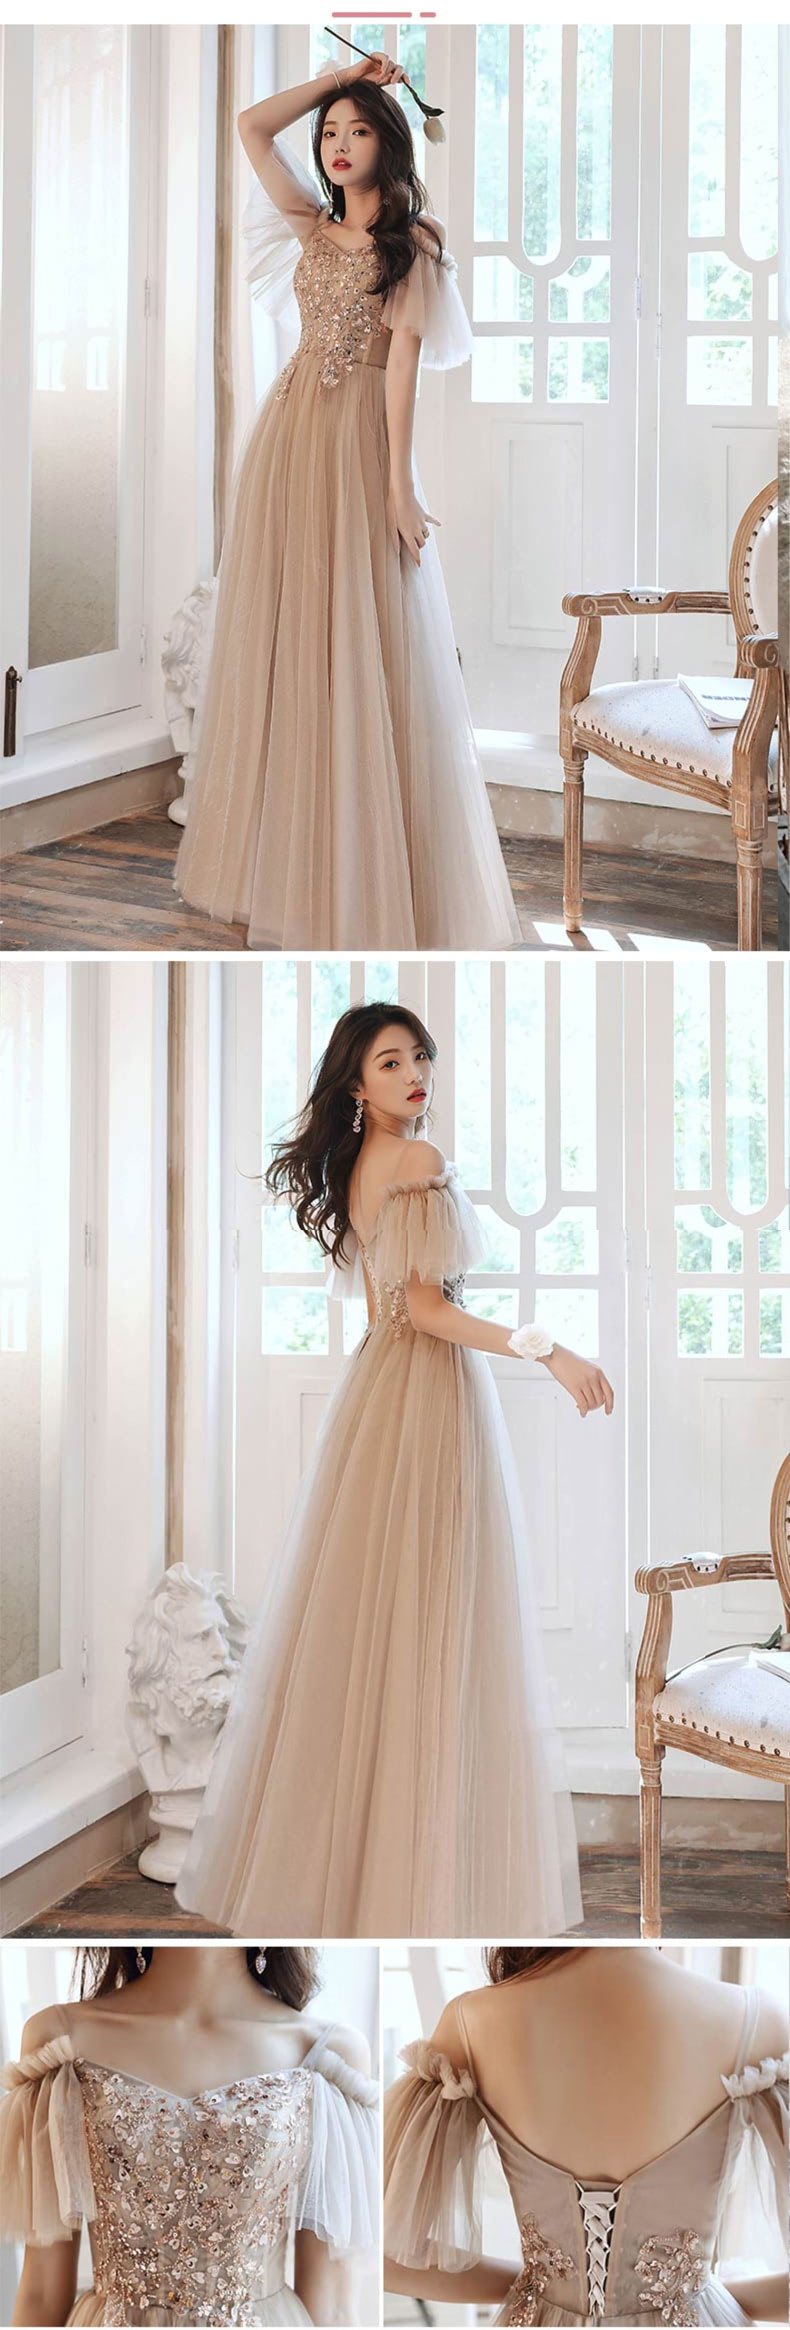 Charming-Embroidery-Ruffle-Lace-Long-Bridesmaid-Dress-Ball-Gown19.jpg